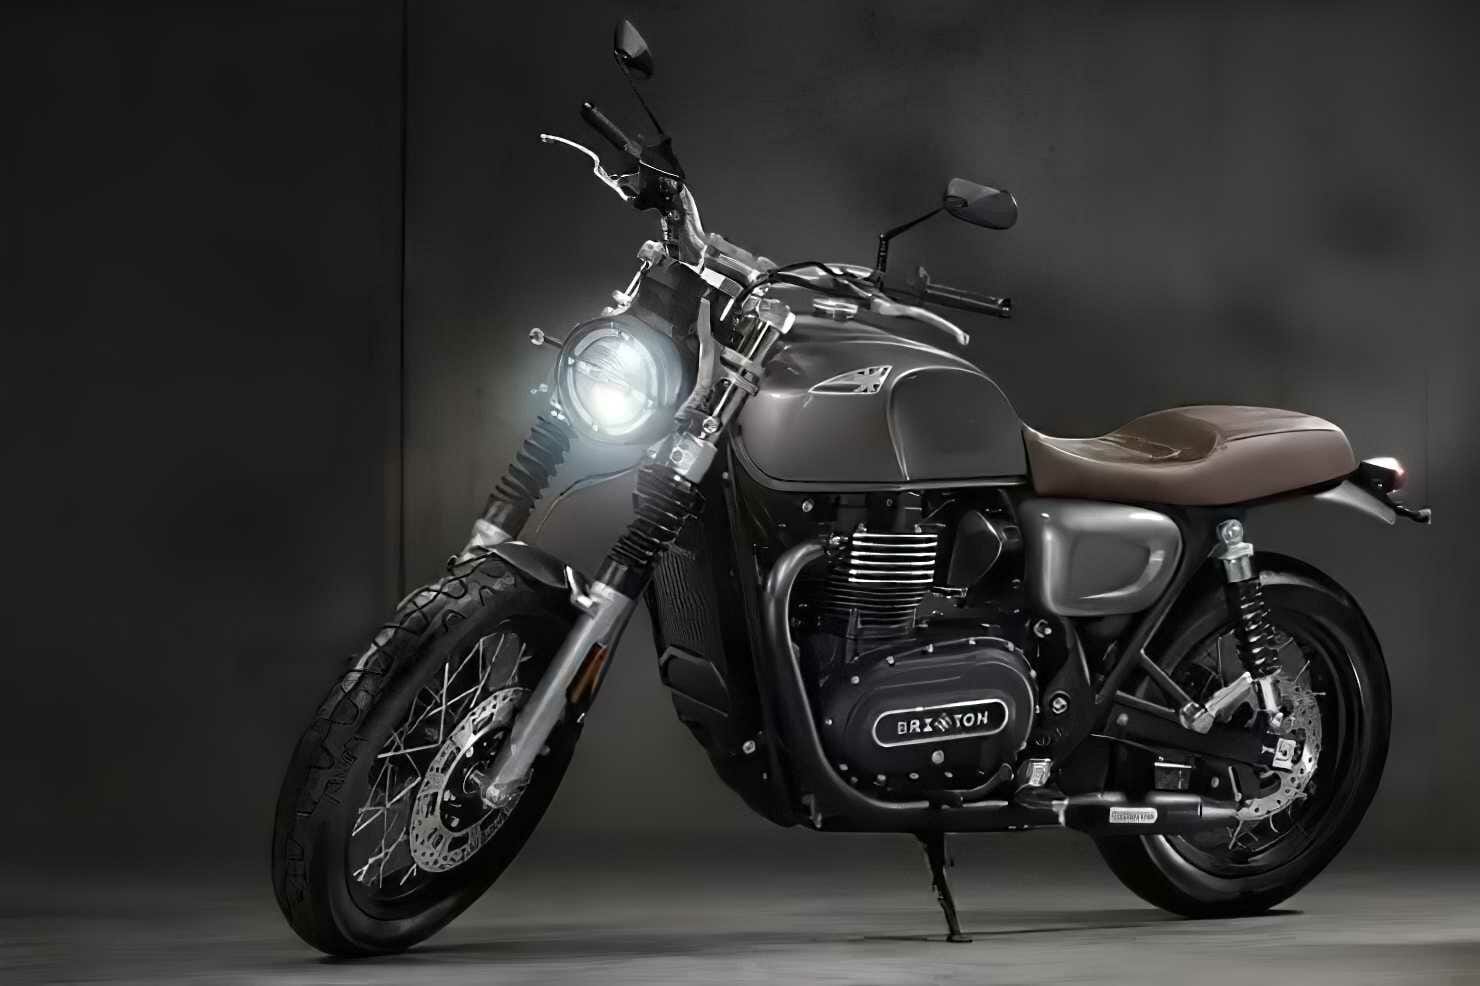 Brixton builds Bonneville rival
- also in the MOTORCYCLES.NEWS APP